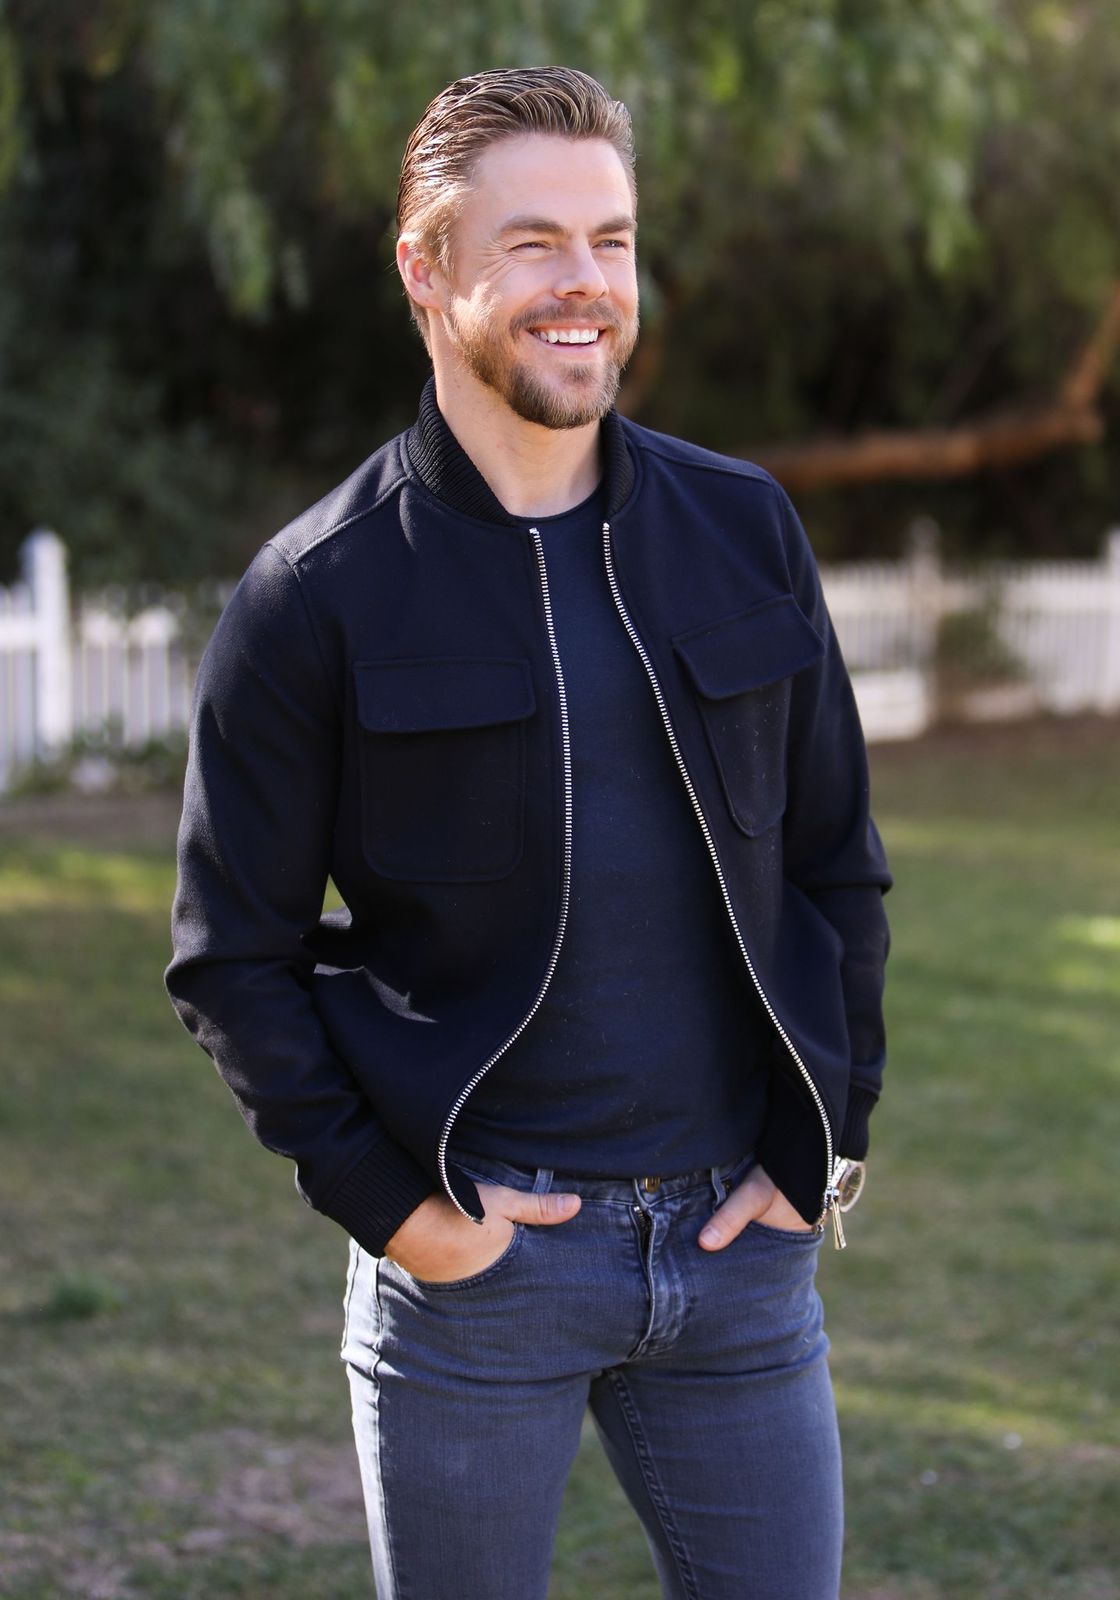 Derek Hough visits Hallmark Channel's "Home & Family" at Universal Studios Hollywood on February 04, 2020, in Universal City, California | Photo: Paul Archuleta/Getty Images